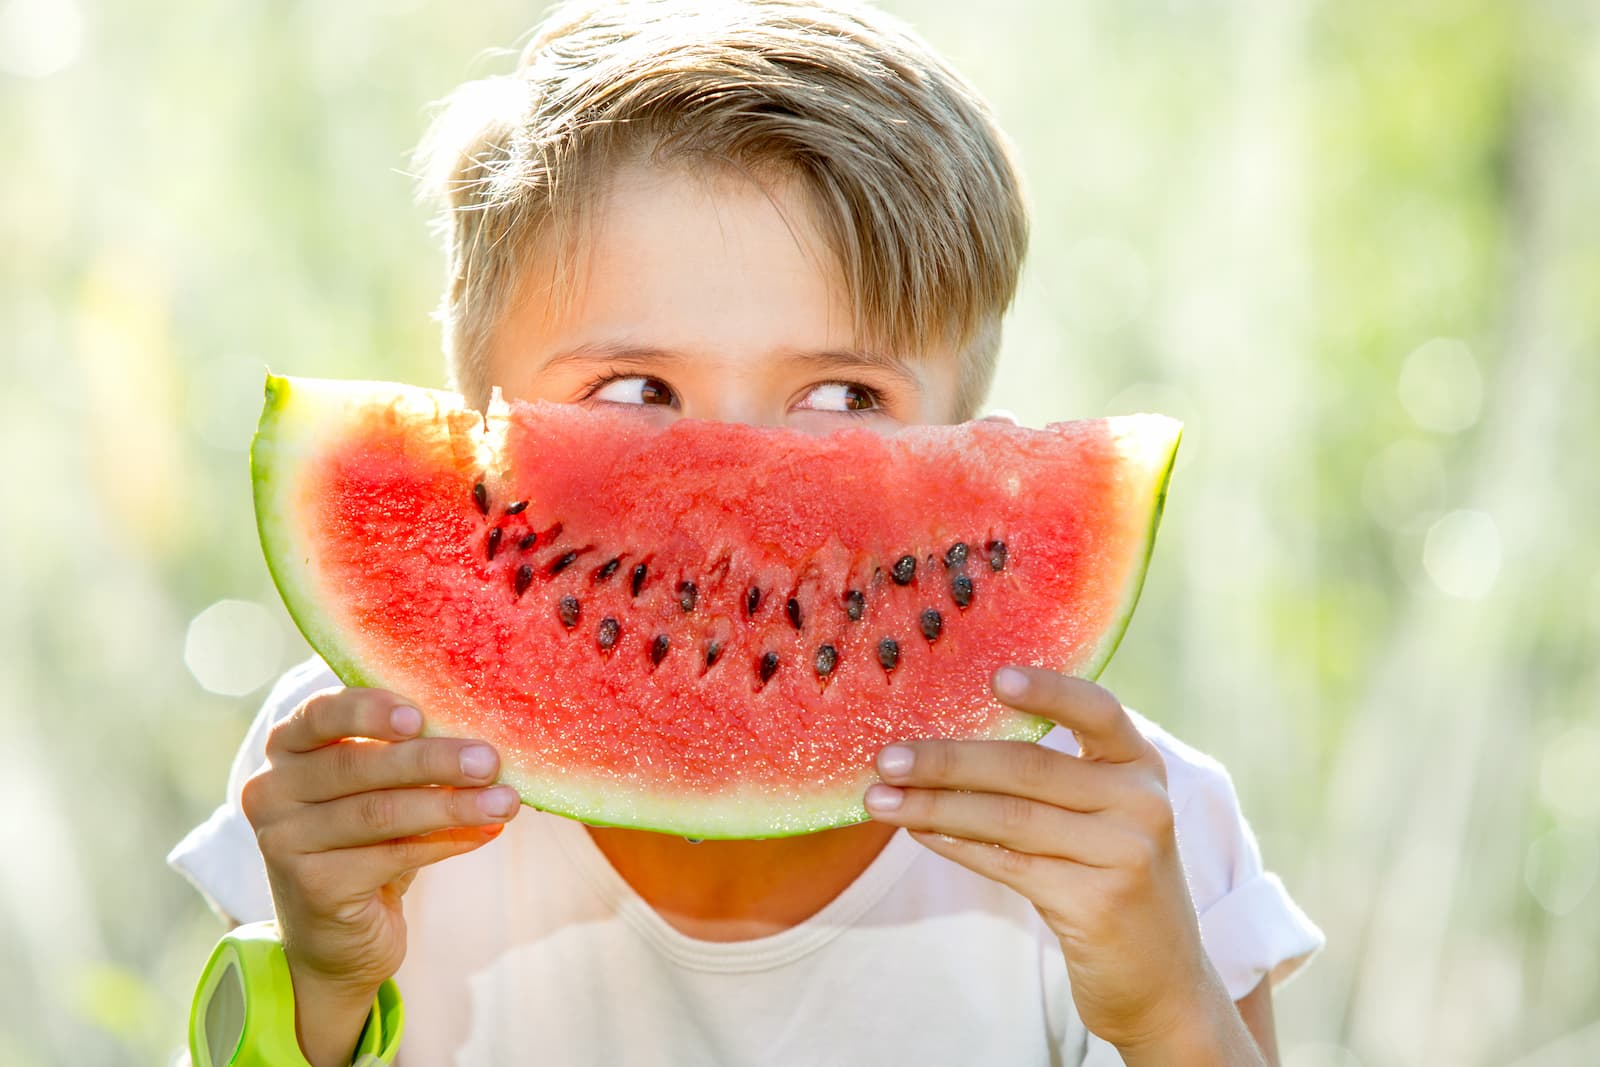 Encouraging consumption of fruits and vegetables in children is the key to ensure good health